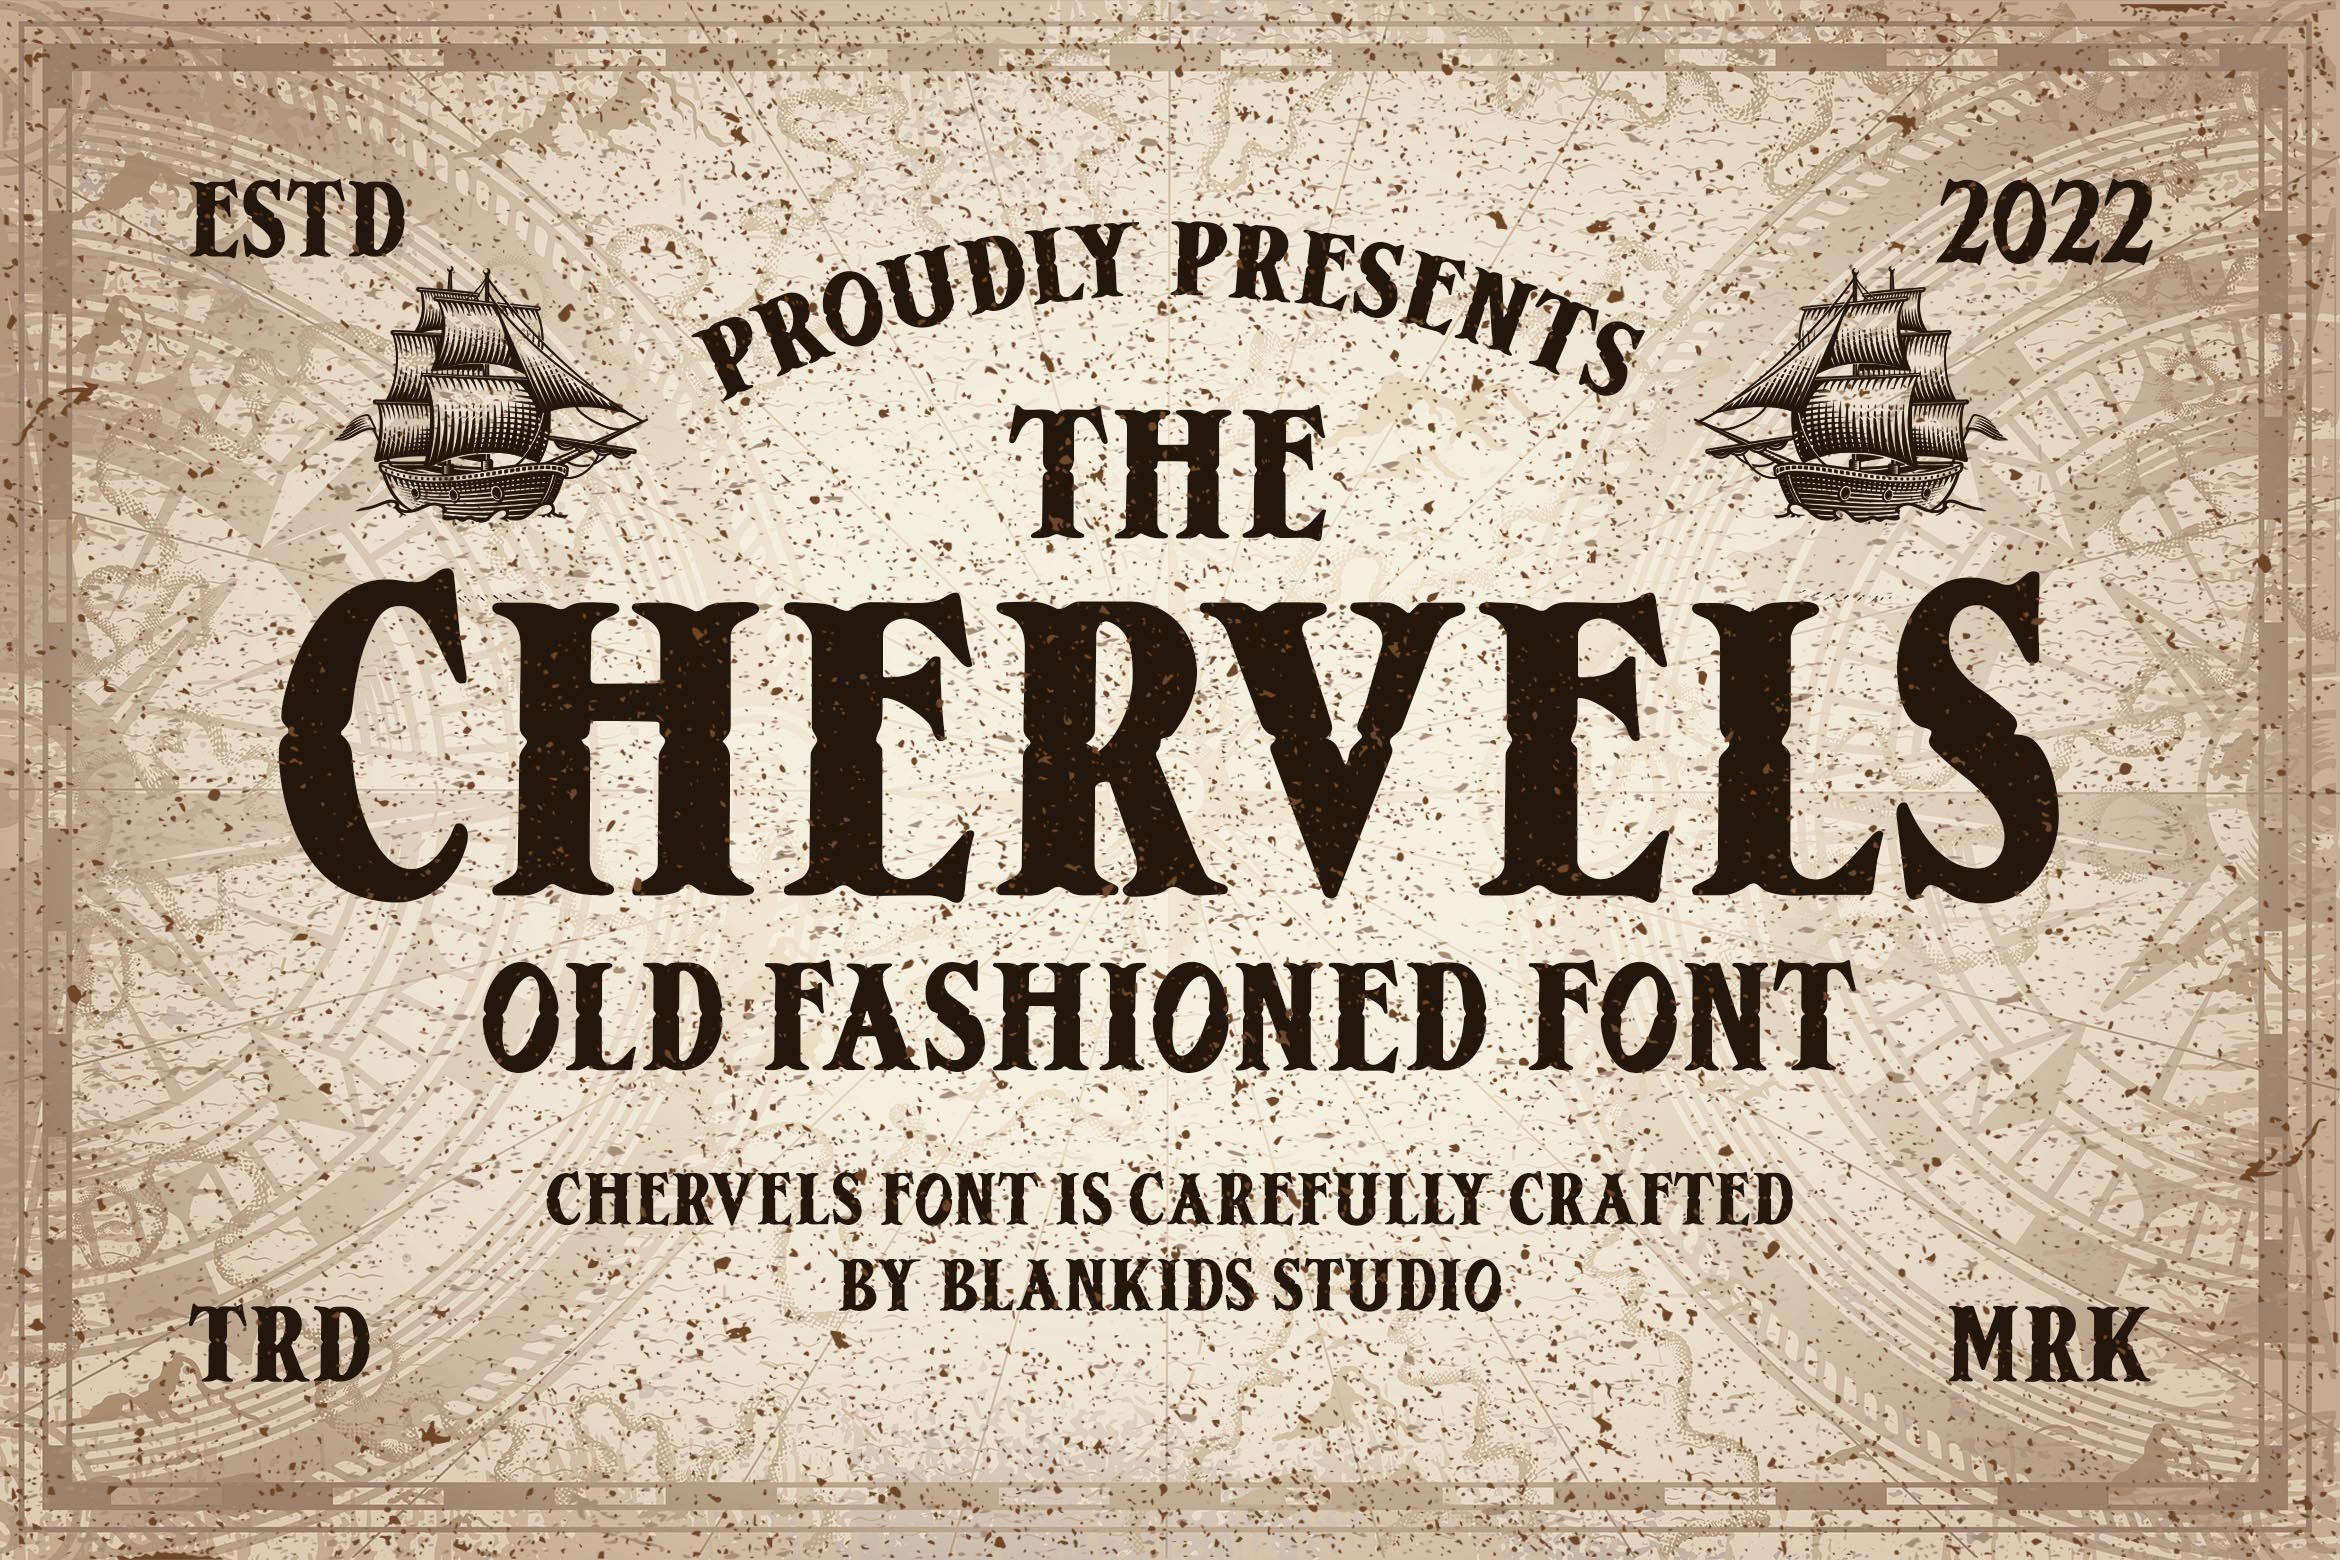 Chervels an old Fashioned Font cover image.